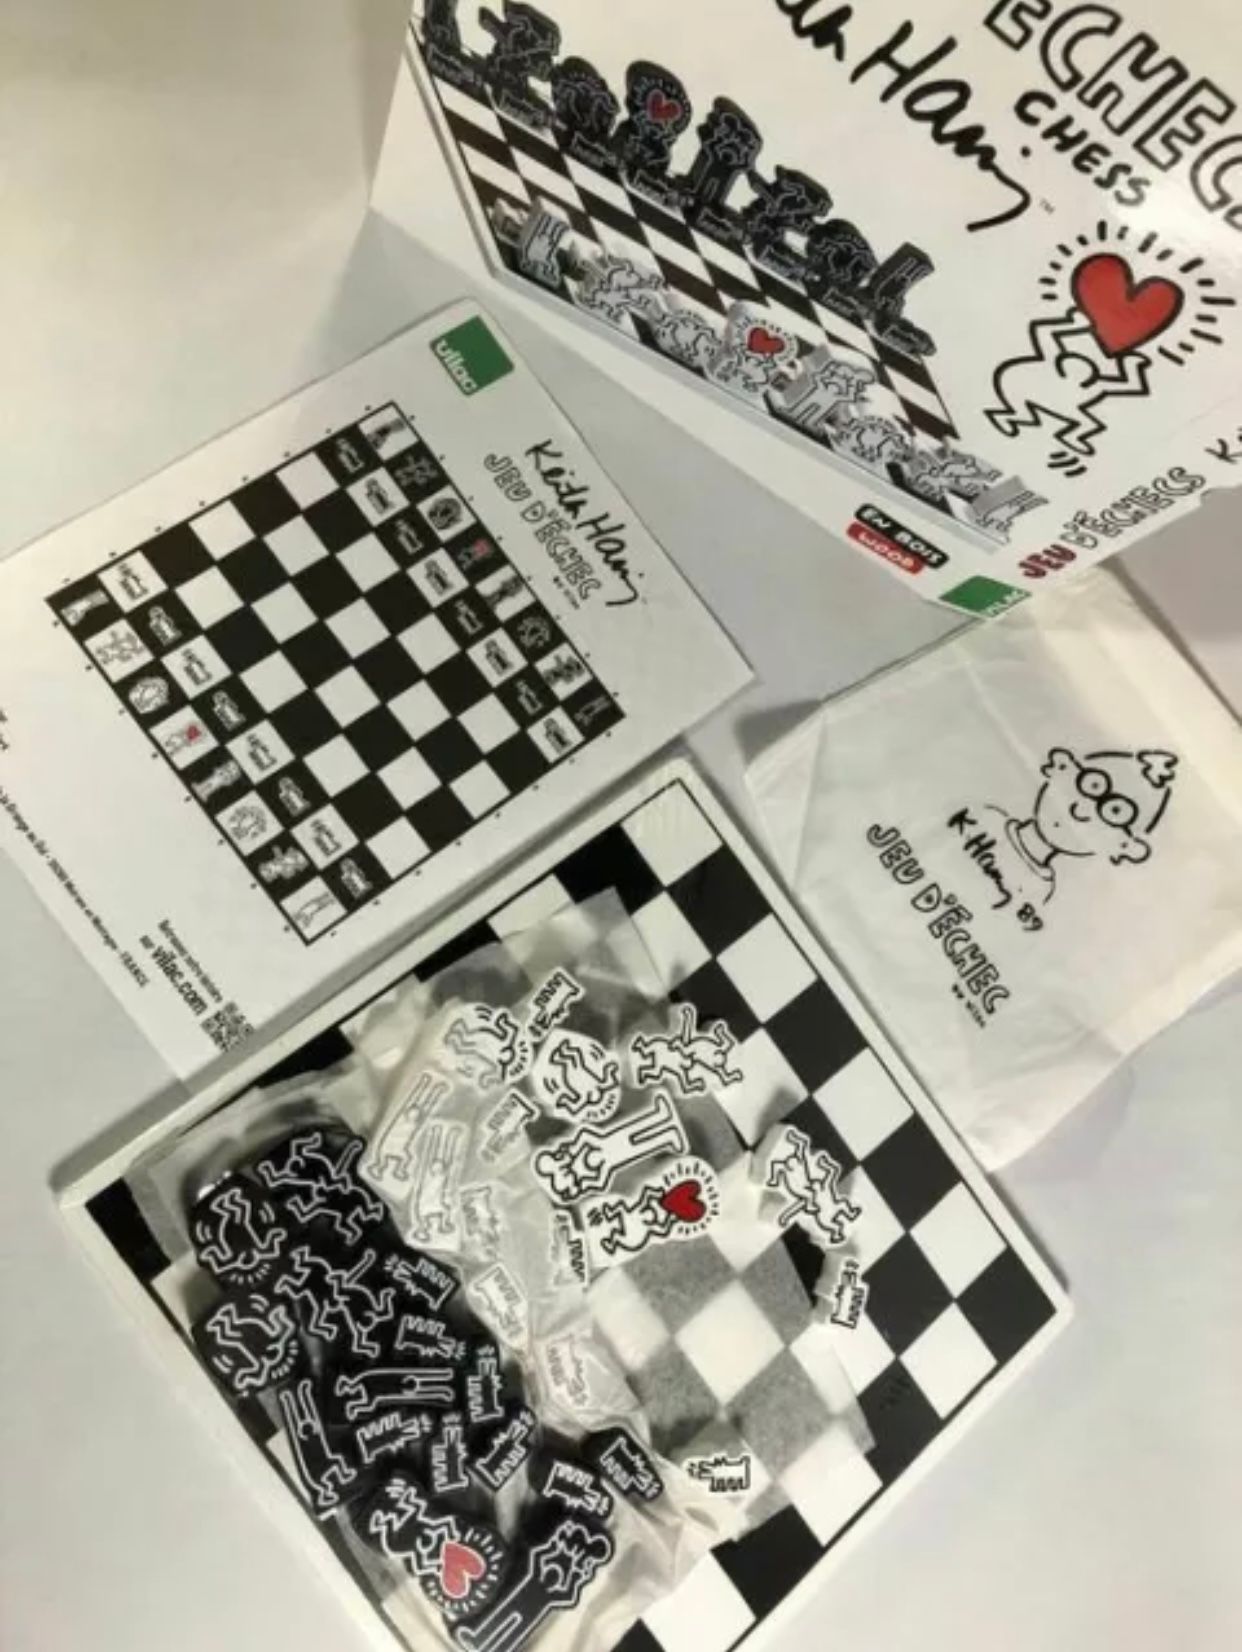 Null Keith HARING" CHESS GAME by Vilac France. Exclusive to MoMA

Turned and lac&hellip;